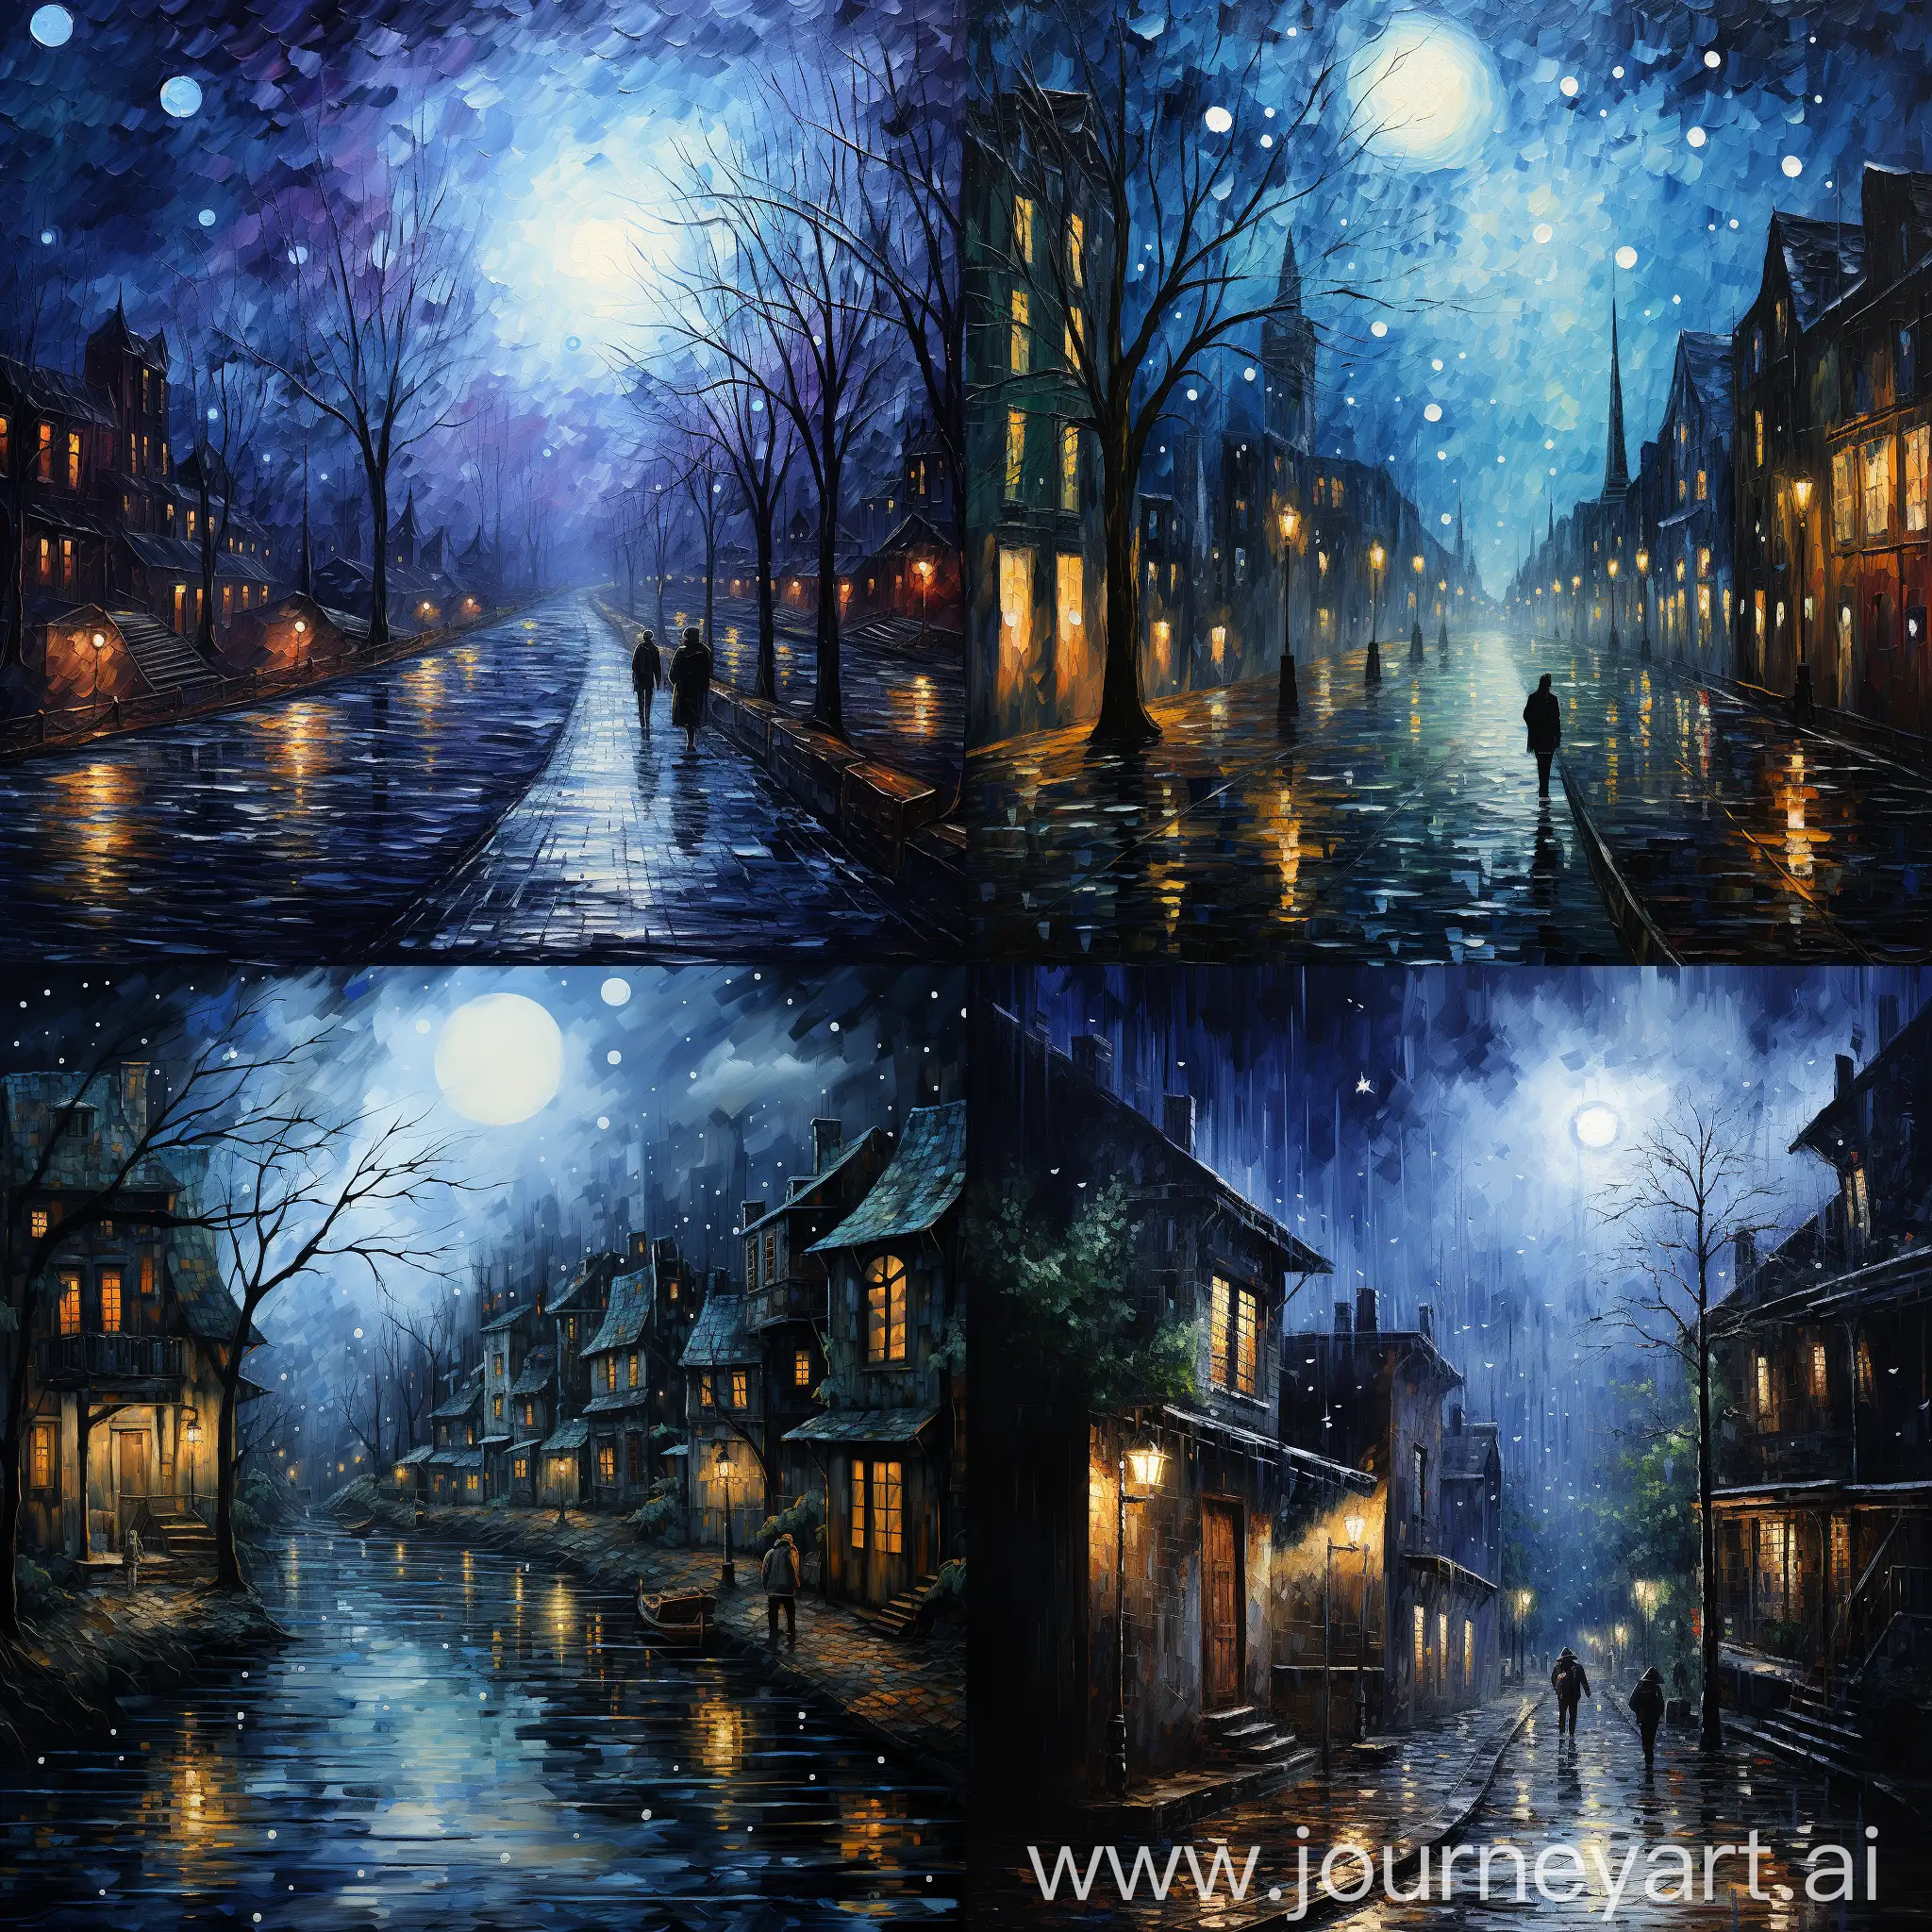 Blue-French-Town-on-a-Rainy-Night-with-Blackberry-Fruit-Inspired-by-Starry-Night-Vincent-Van-Gogh-Style-Fantasy-Skies